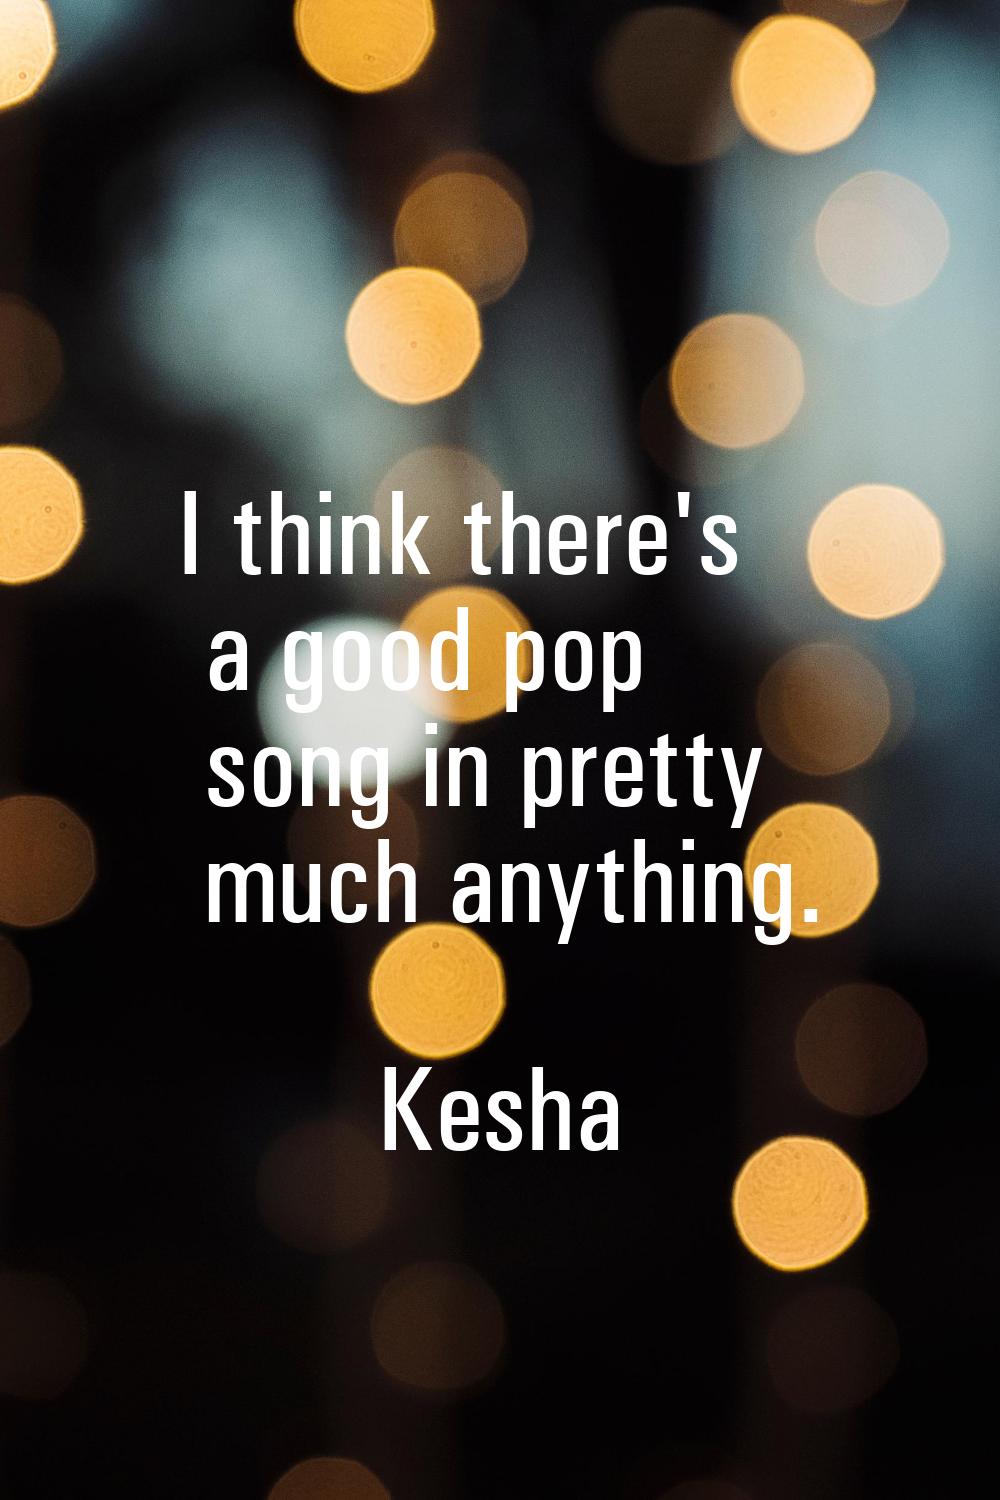 I think there's a good pop song in pretty much anything.